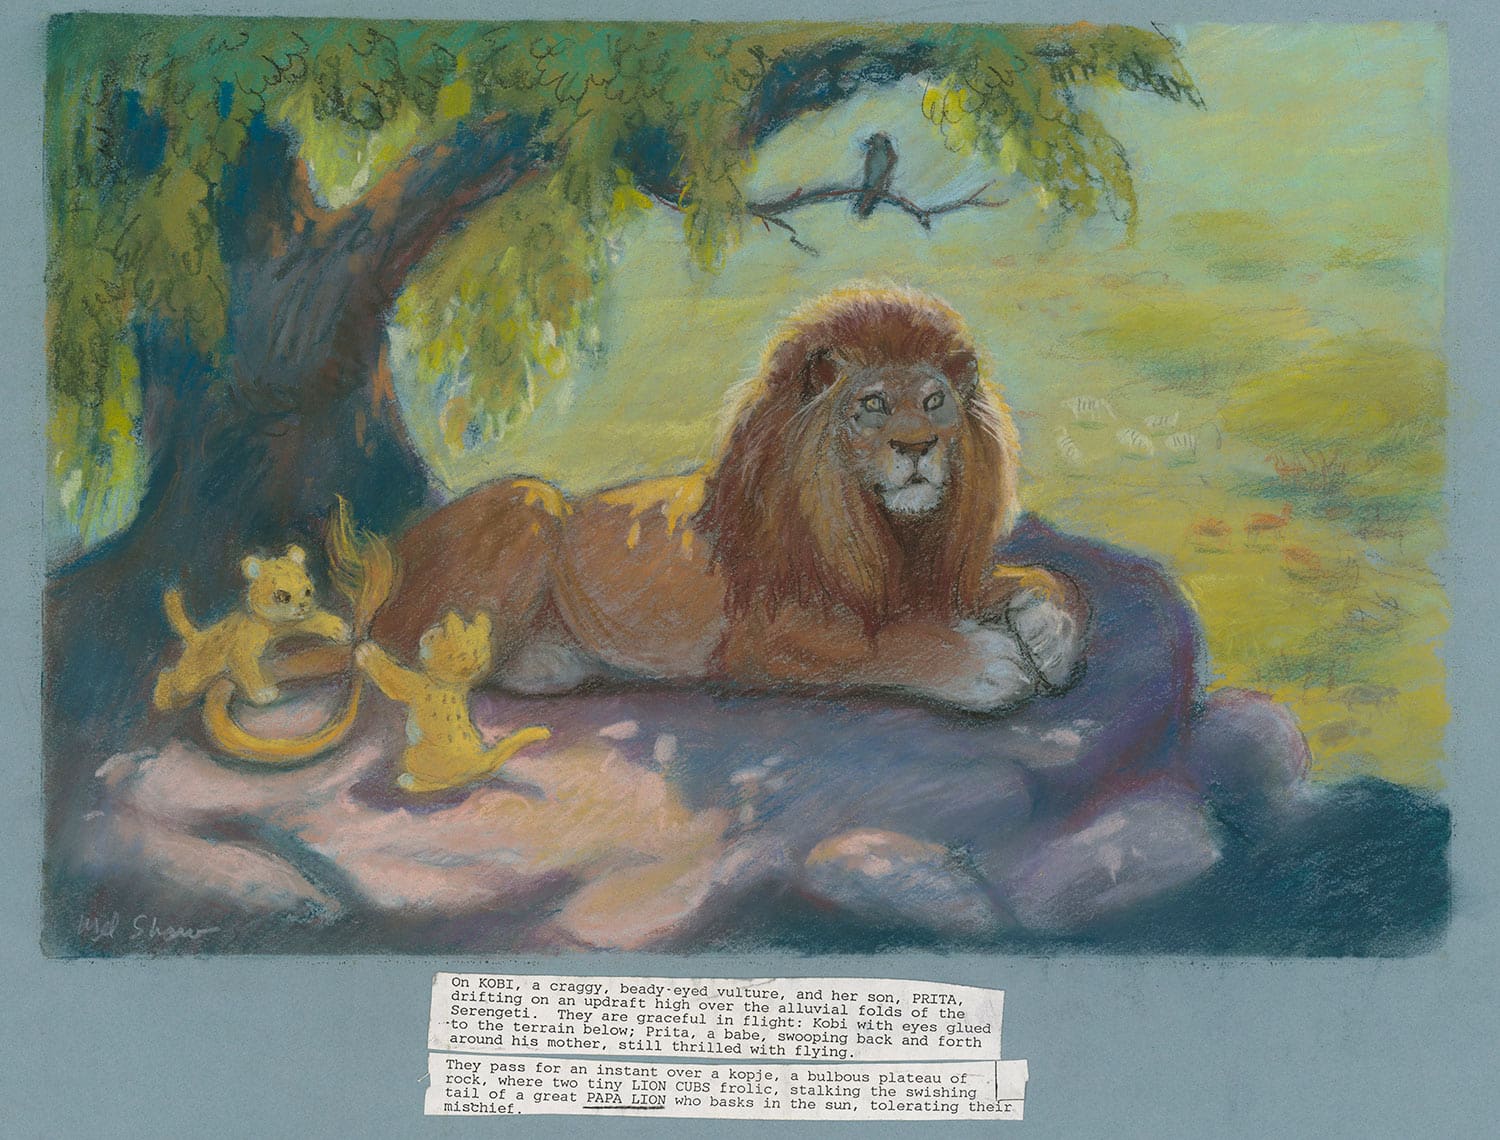 Mel Shaw, concept art for "The Lion King," c. 1992. (Image: The Walt Disney Animation Research Library, © Disney.)